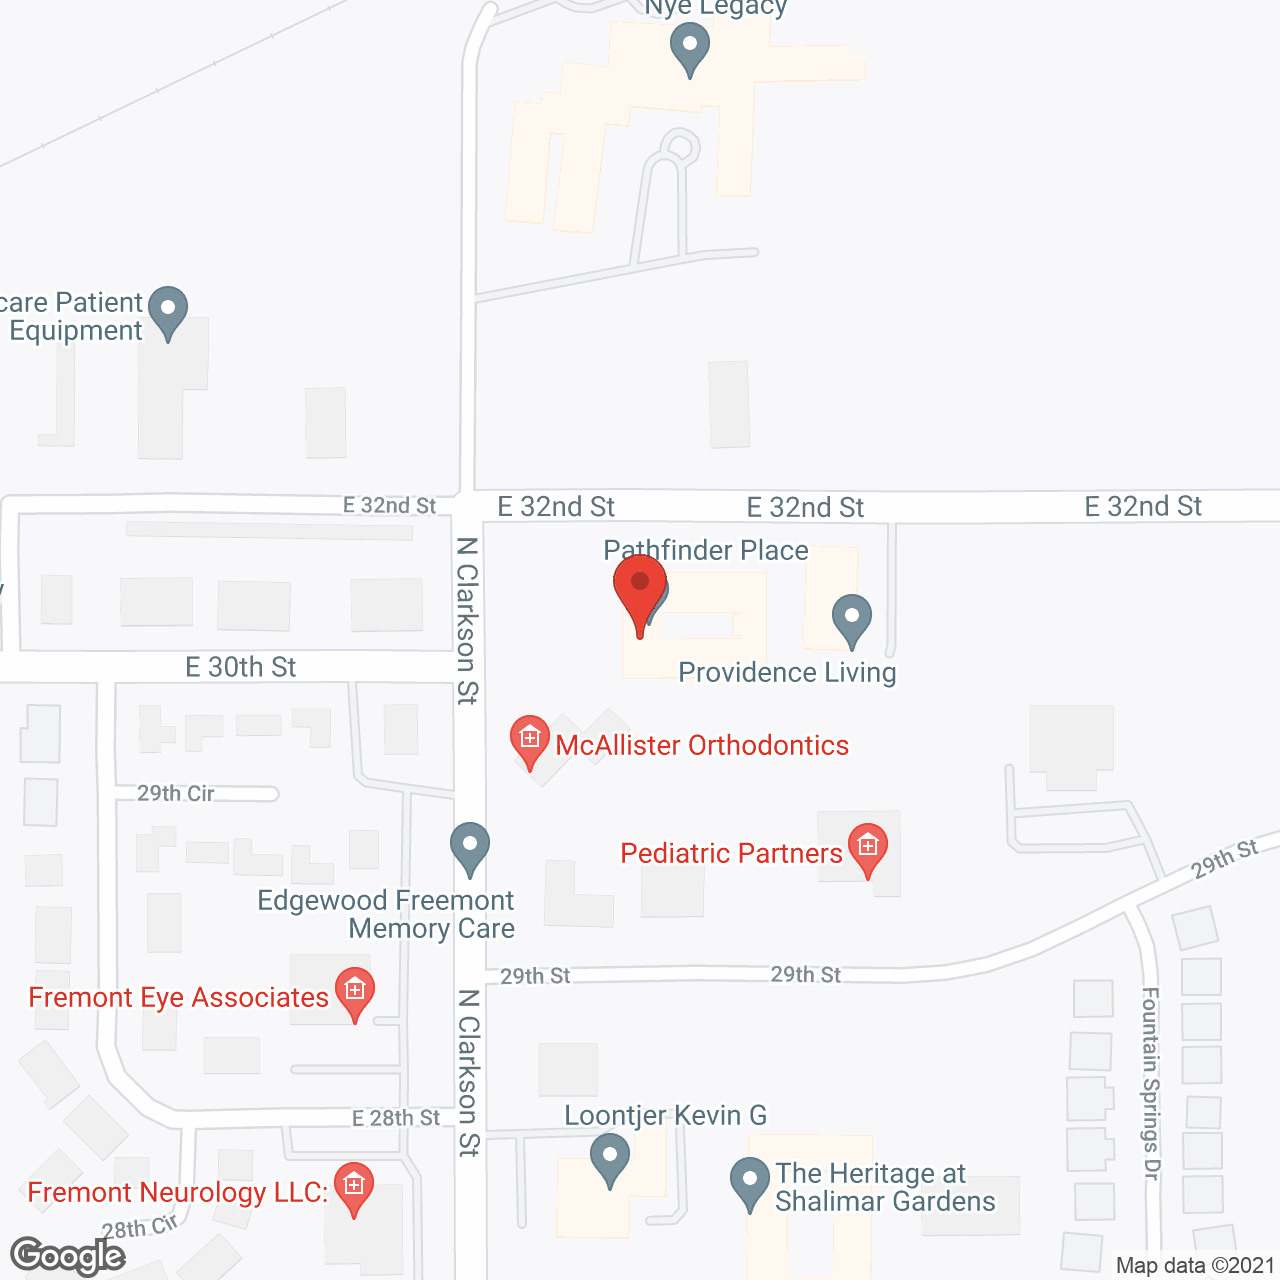 Pathfinder Place in google map